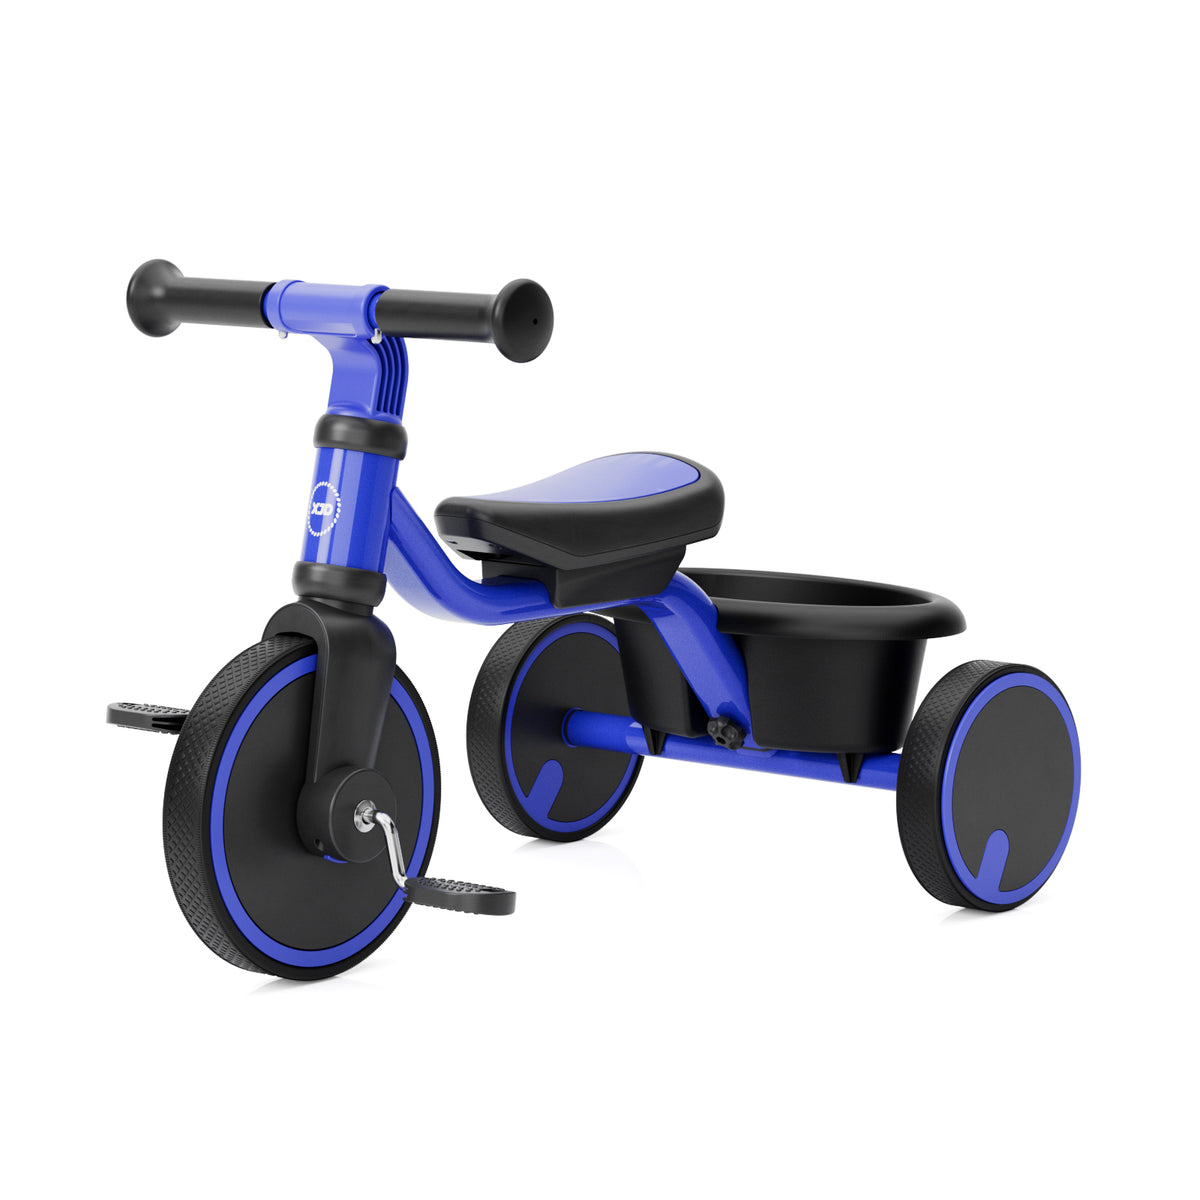 XJD Toddler Training  Balance Bike - No Pedal Bicycle for Kids Ages 1.5+, Blue